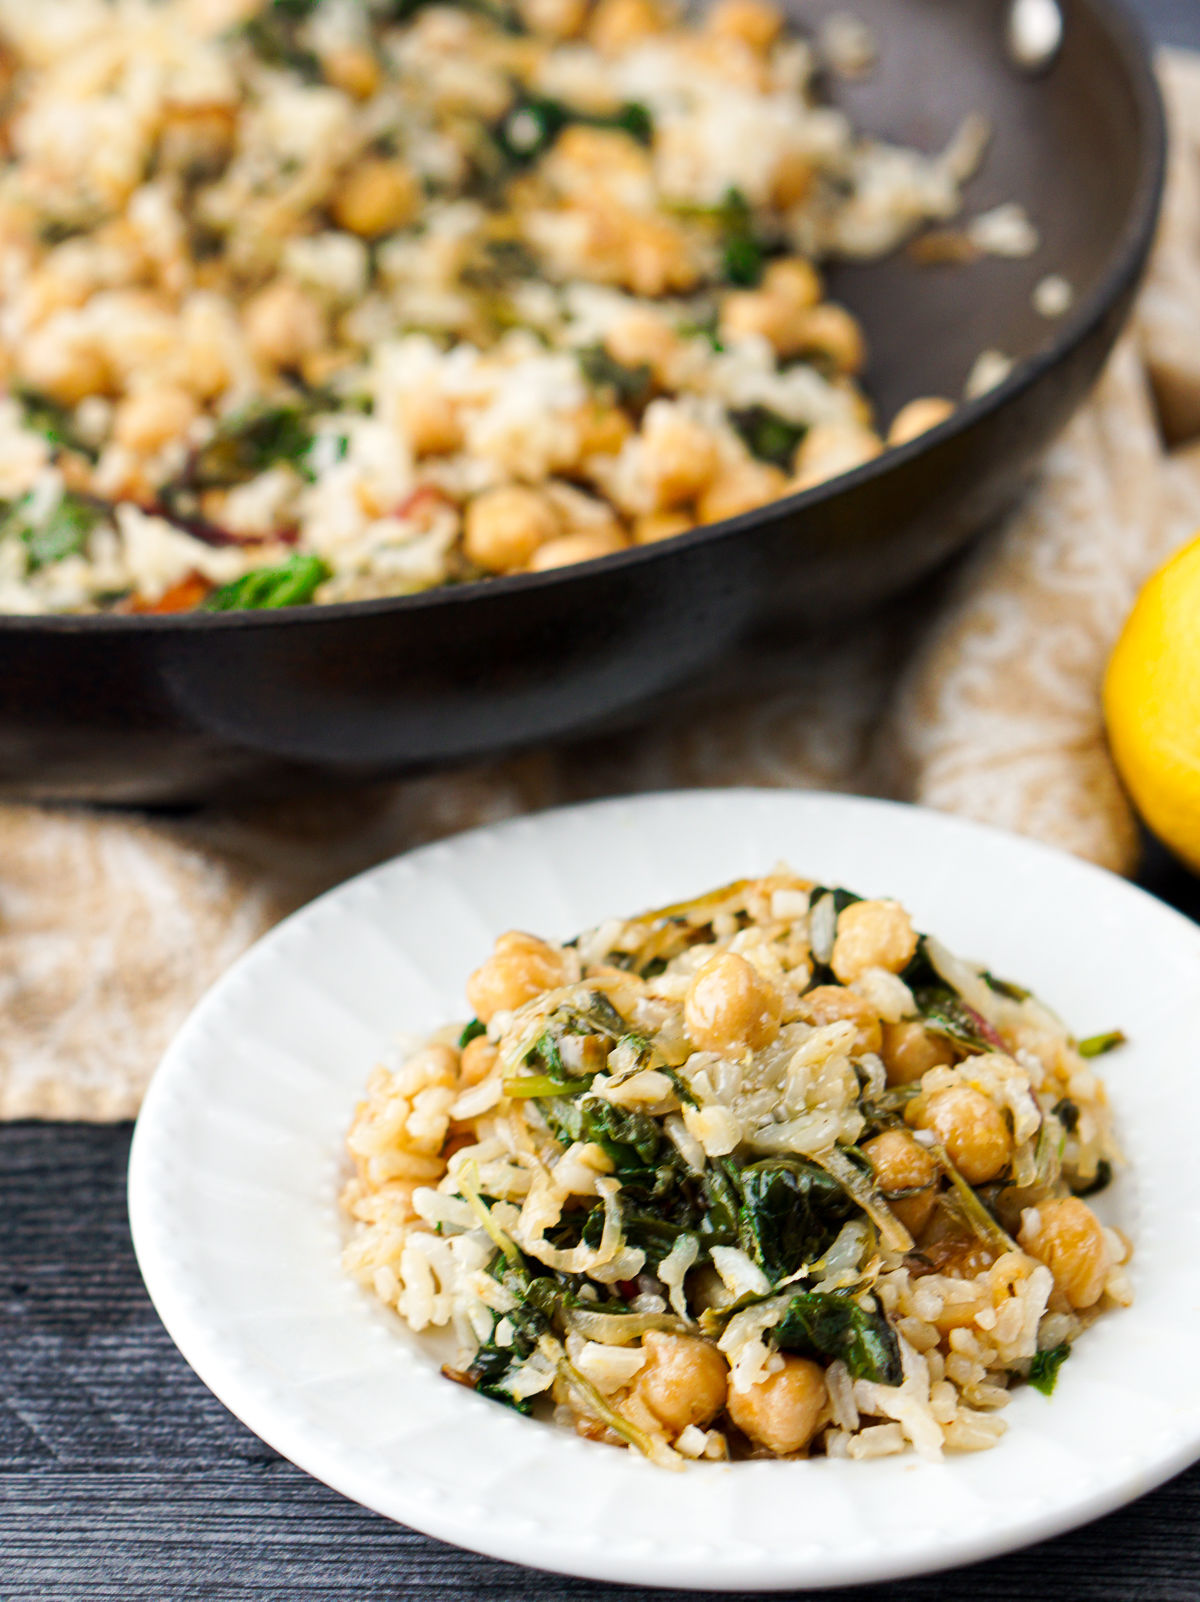 power greens with chickpeas in pan and plate